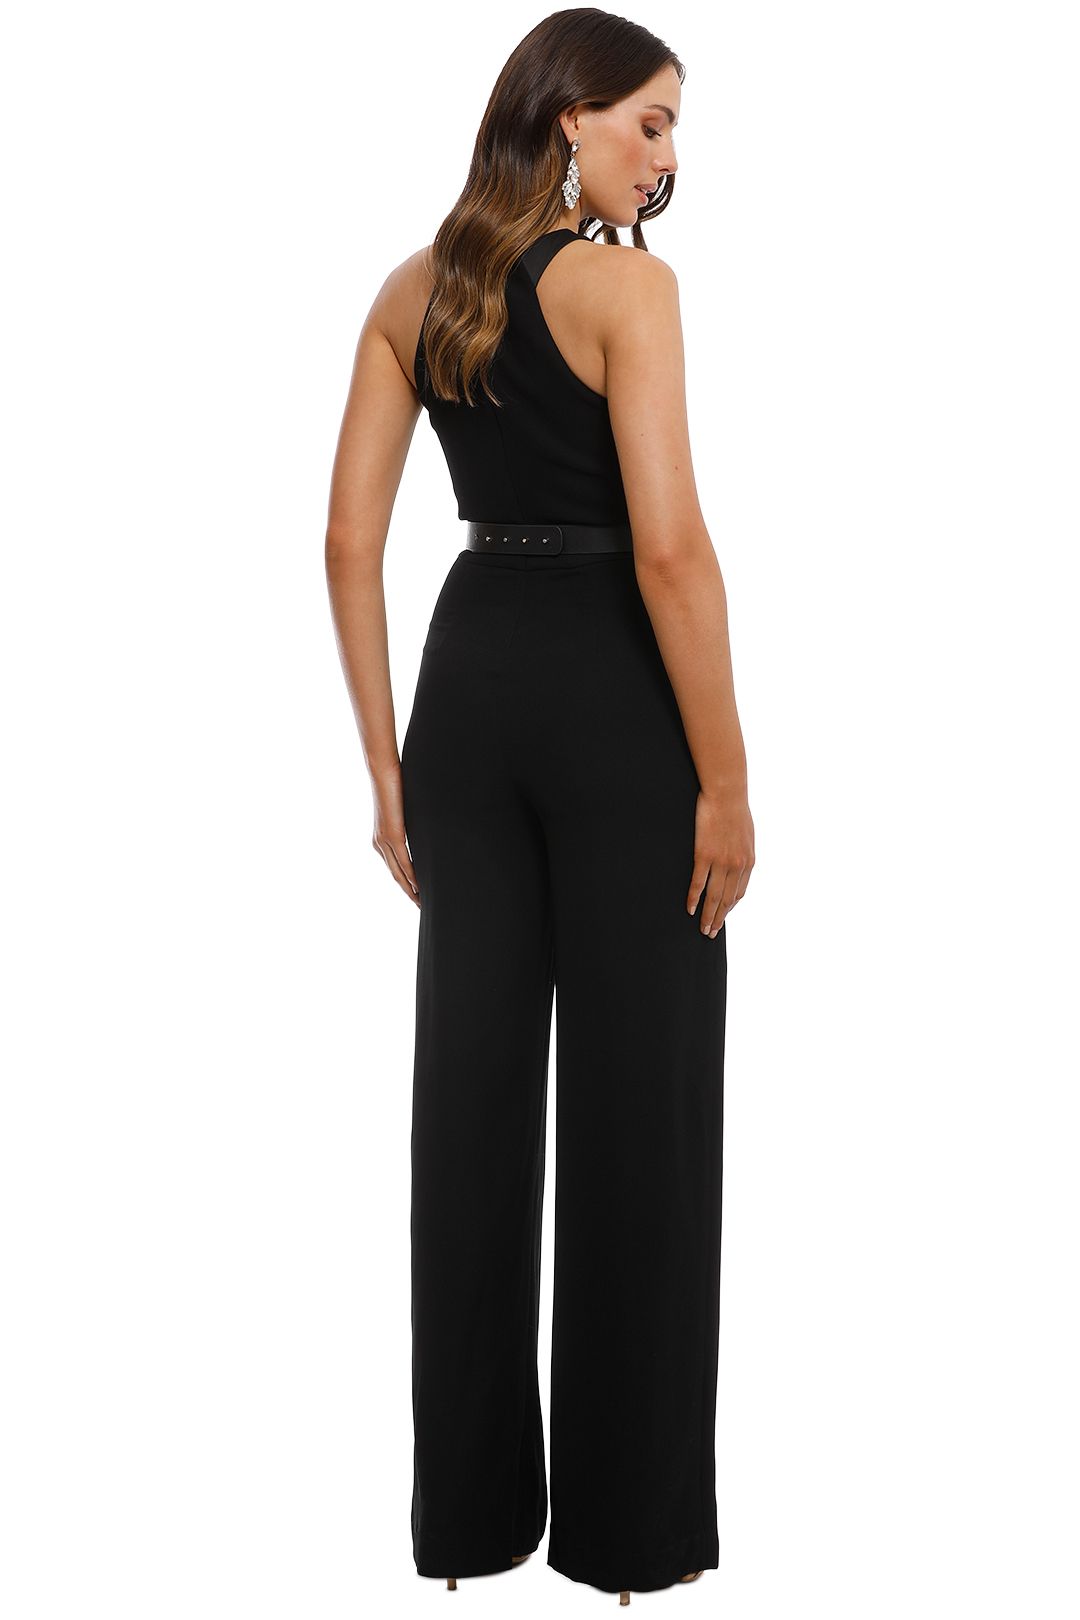 Asymmetrical Jumpsuit in Black by Halston Heritage for Hire